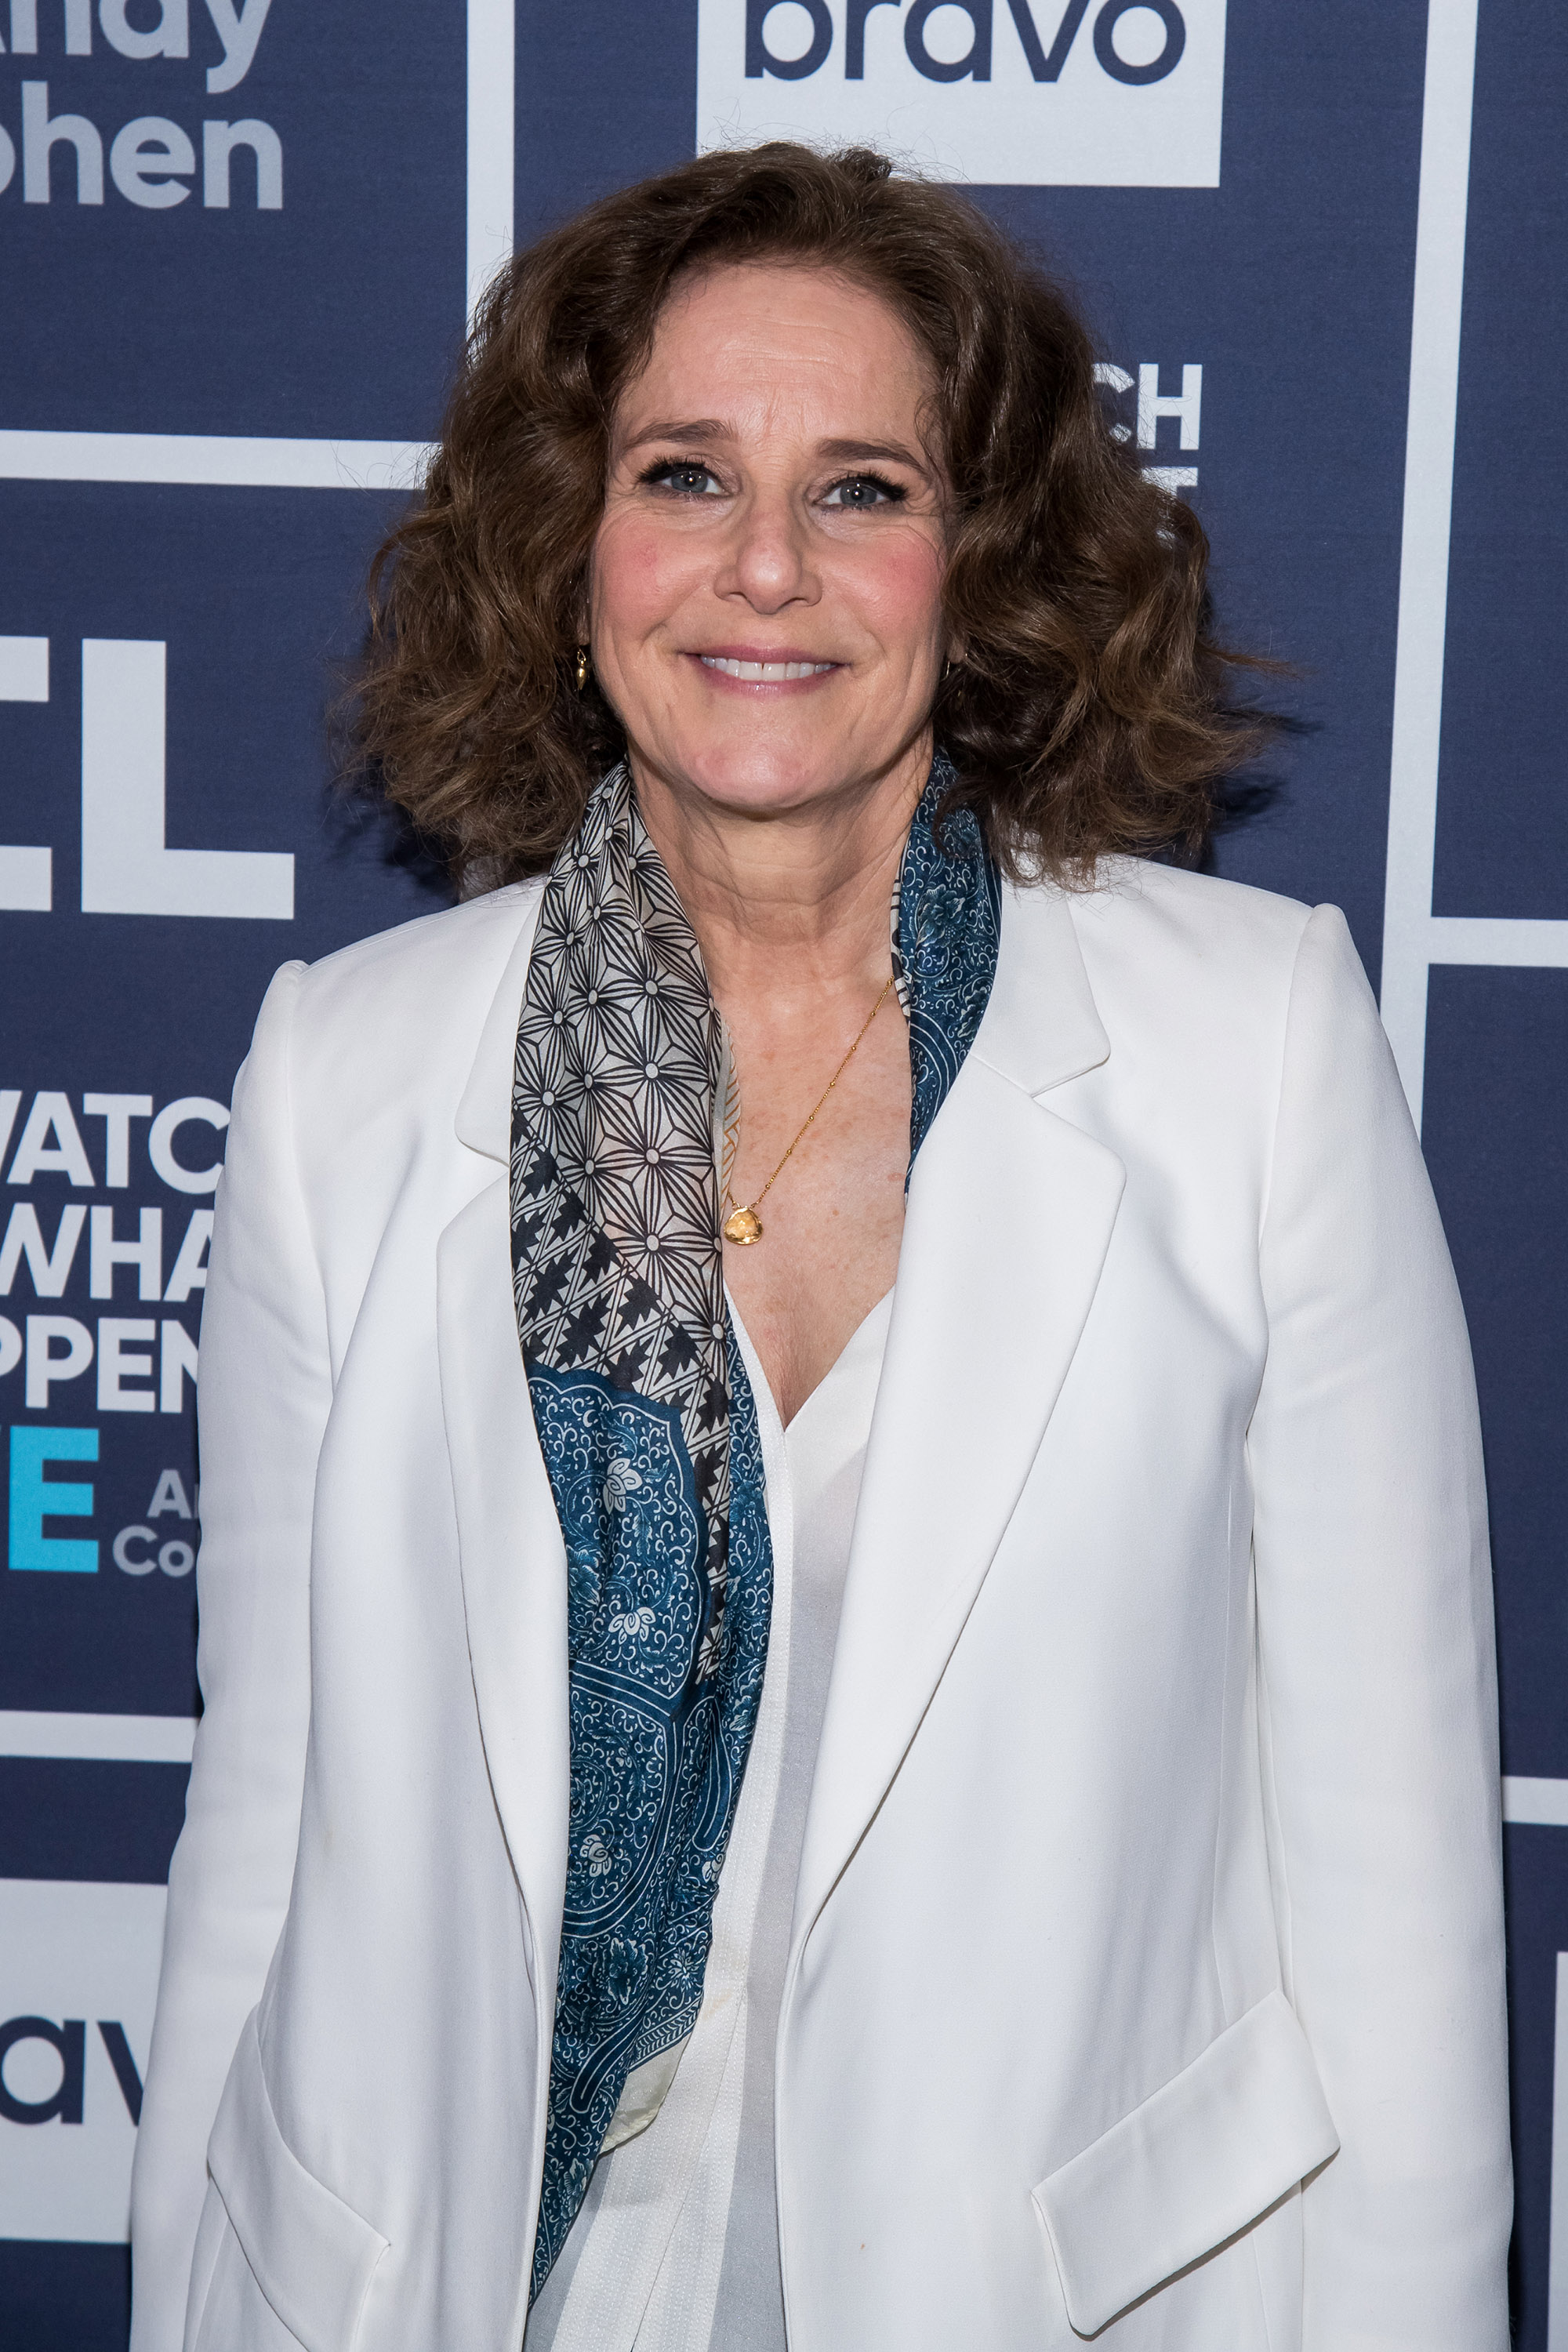 Debra Winger during an appearance on "Watch What Happens Live With Andy Cohen" on October 30, 2018 | Source: Getty Images